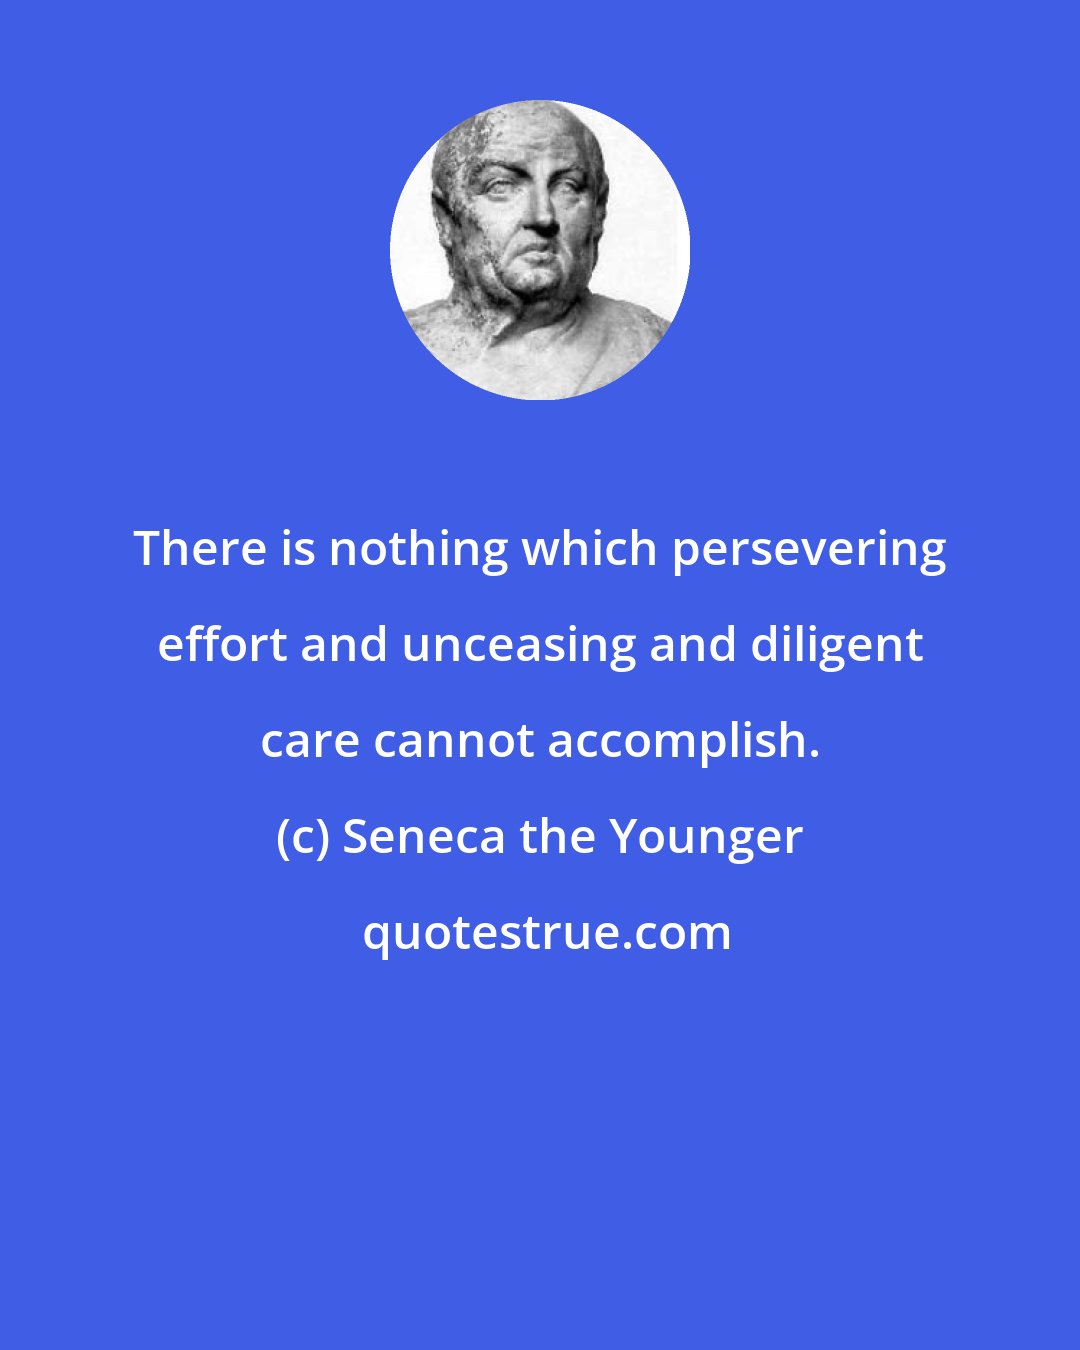 Seneca the Younger: There is nothing which persevering effort and unceasing and diligent care cannot accomplish.